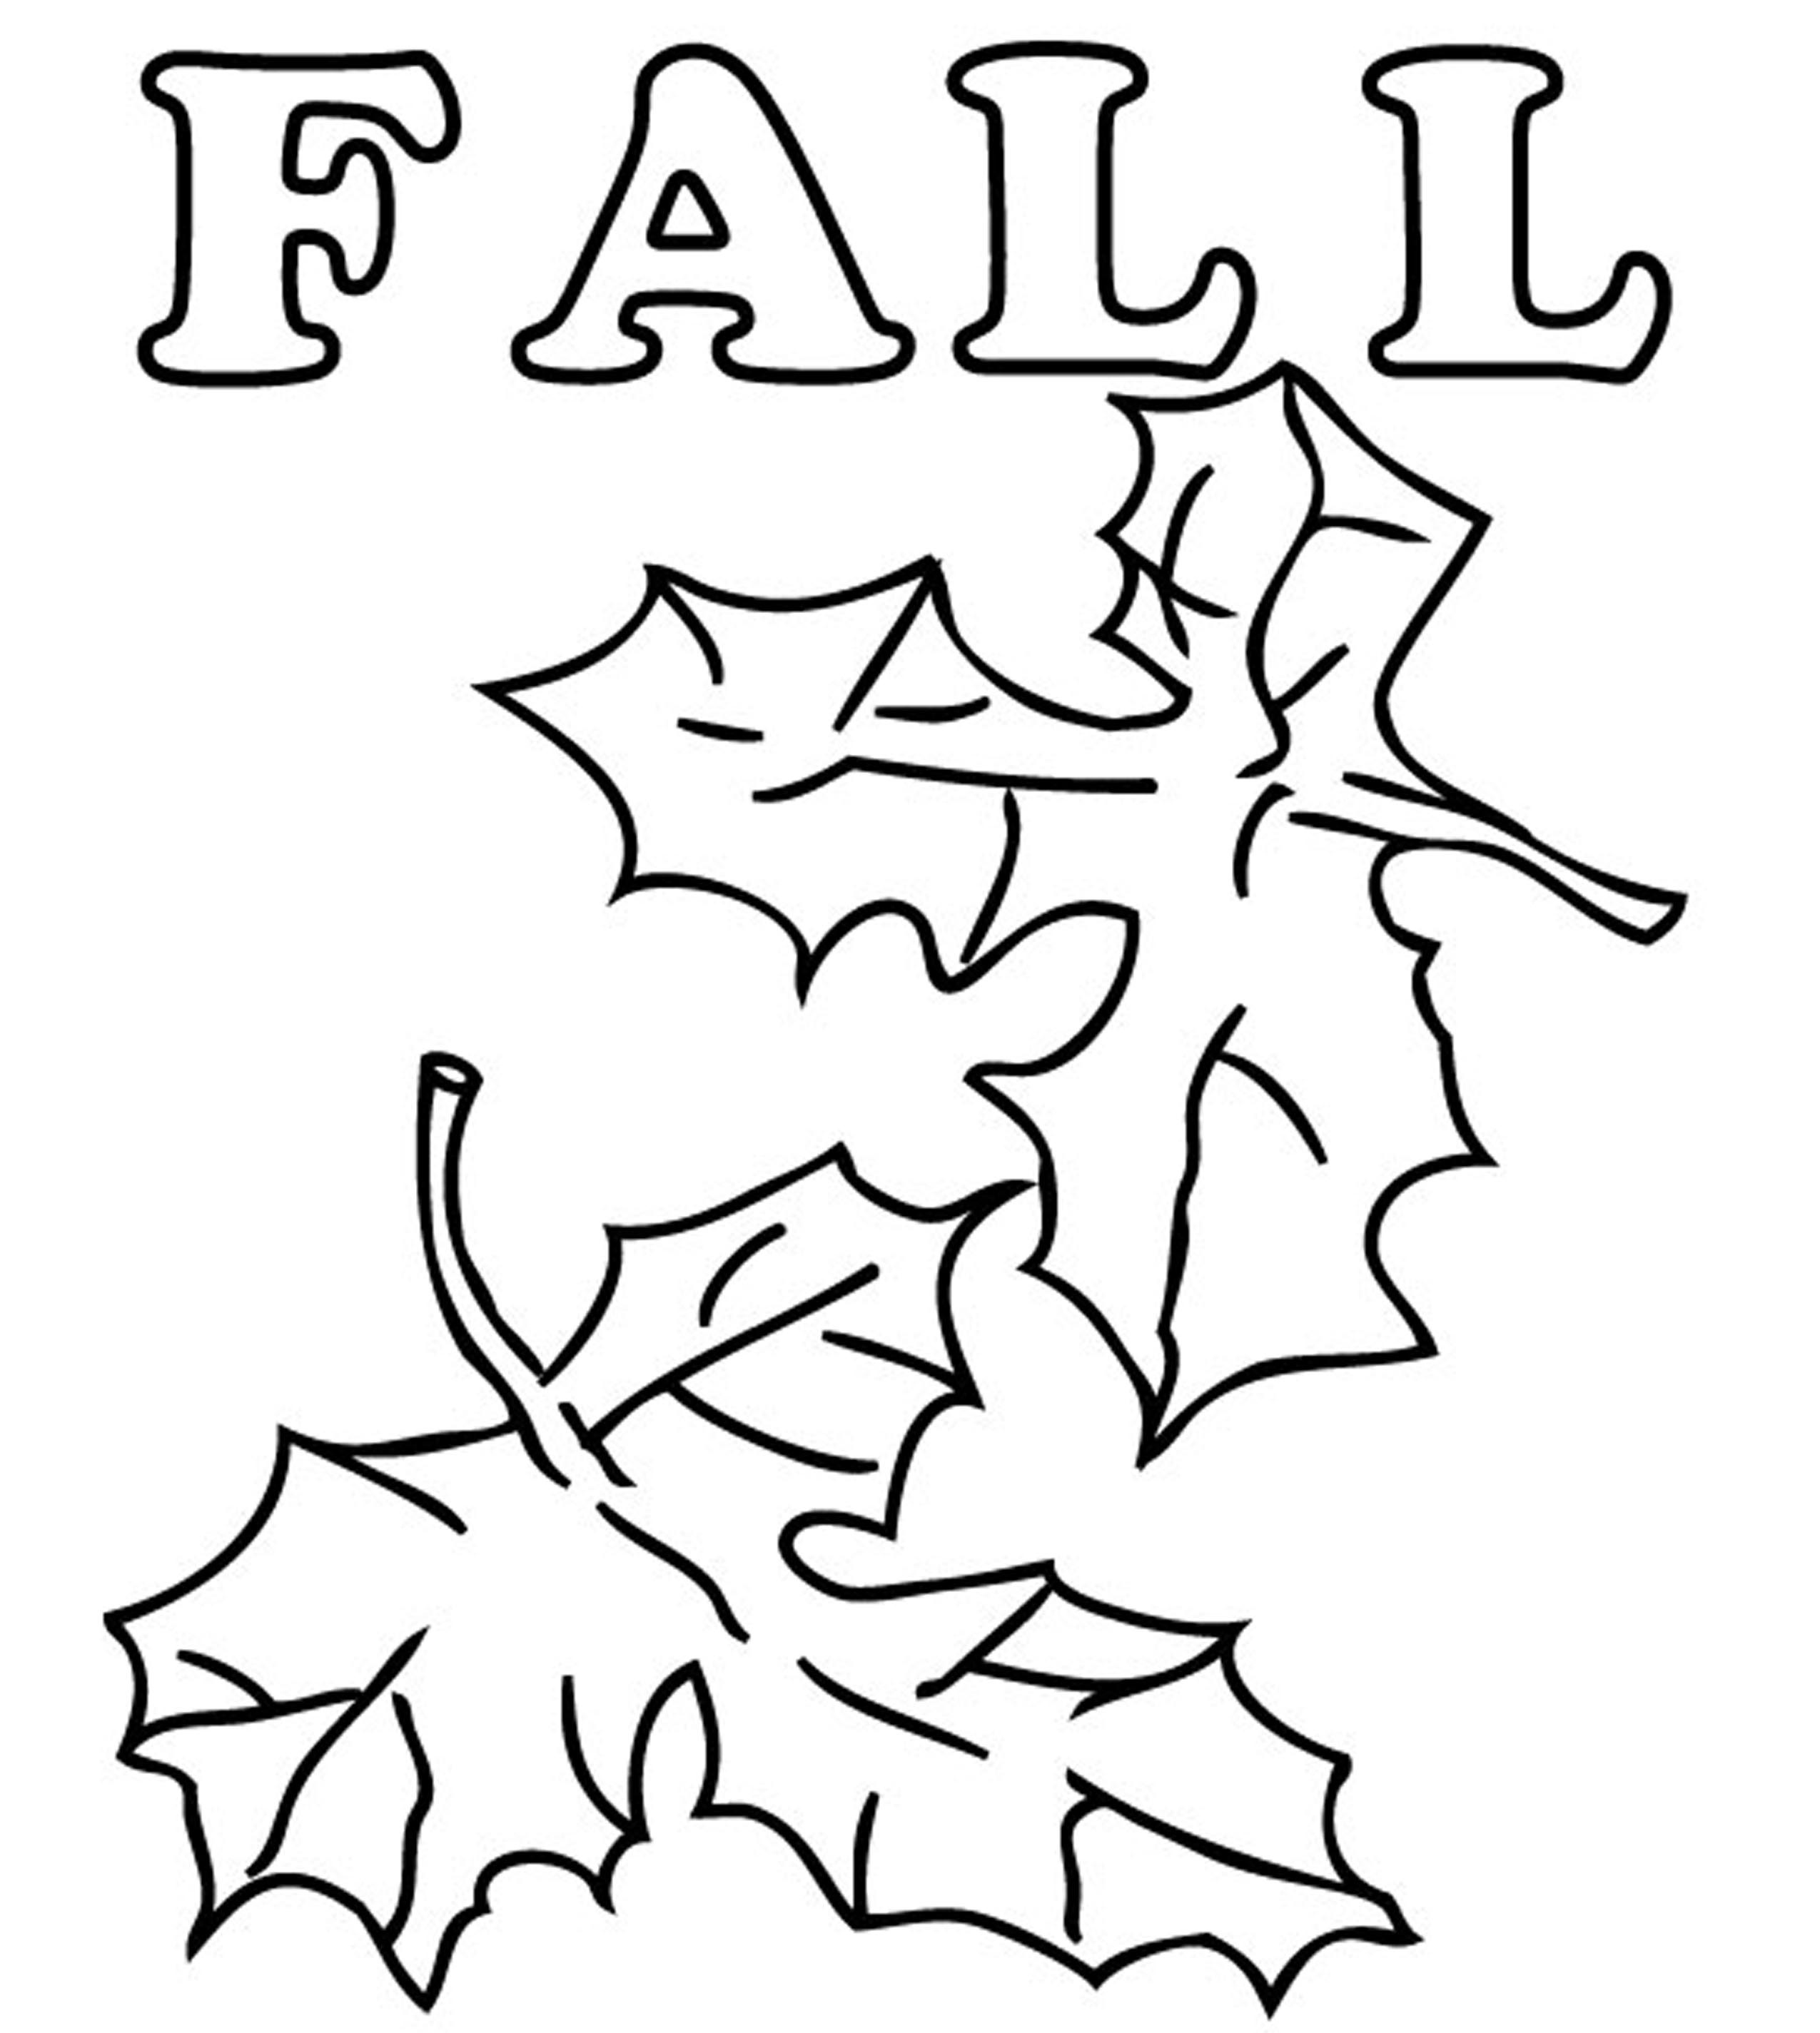 Coloring: Autumn Leaves Coloring Pages. - Free Printable Fall Leaves Coloring Pages